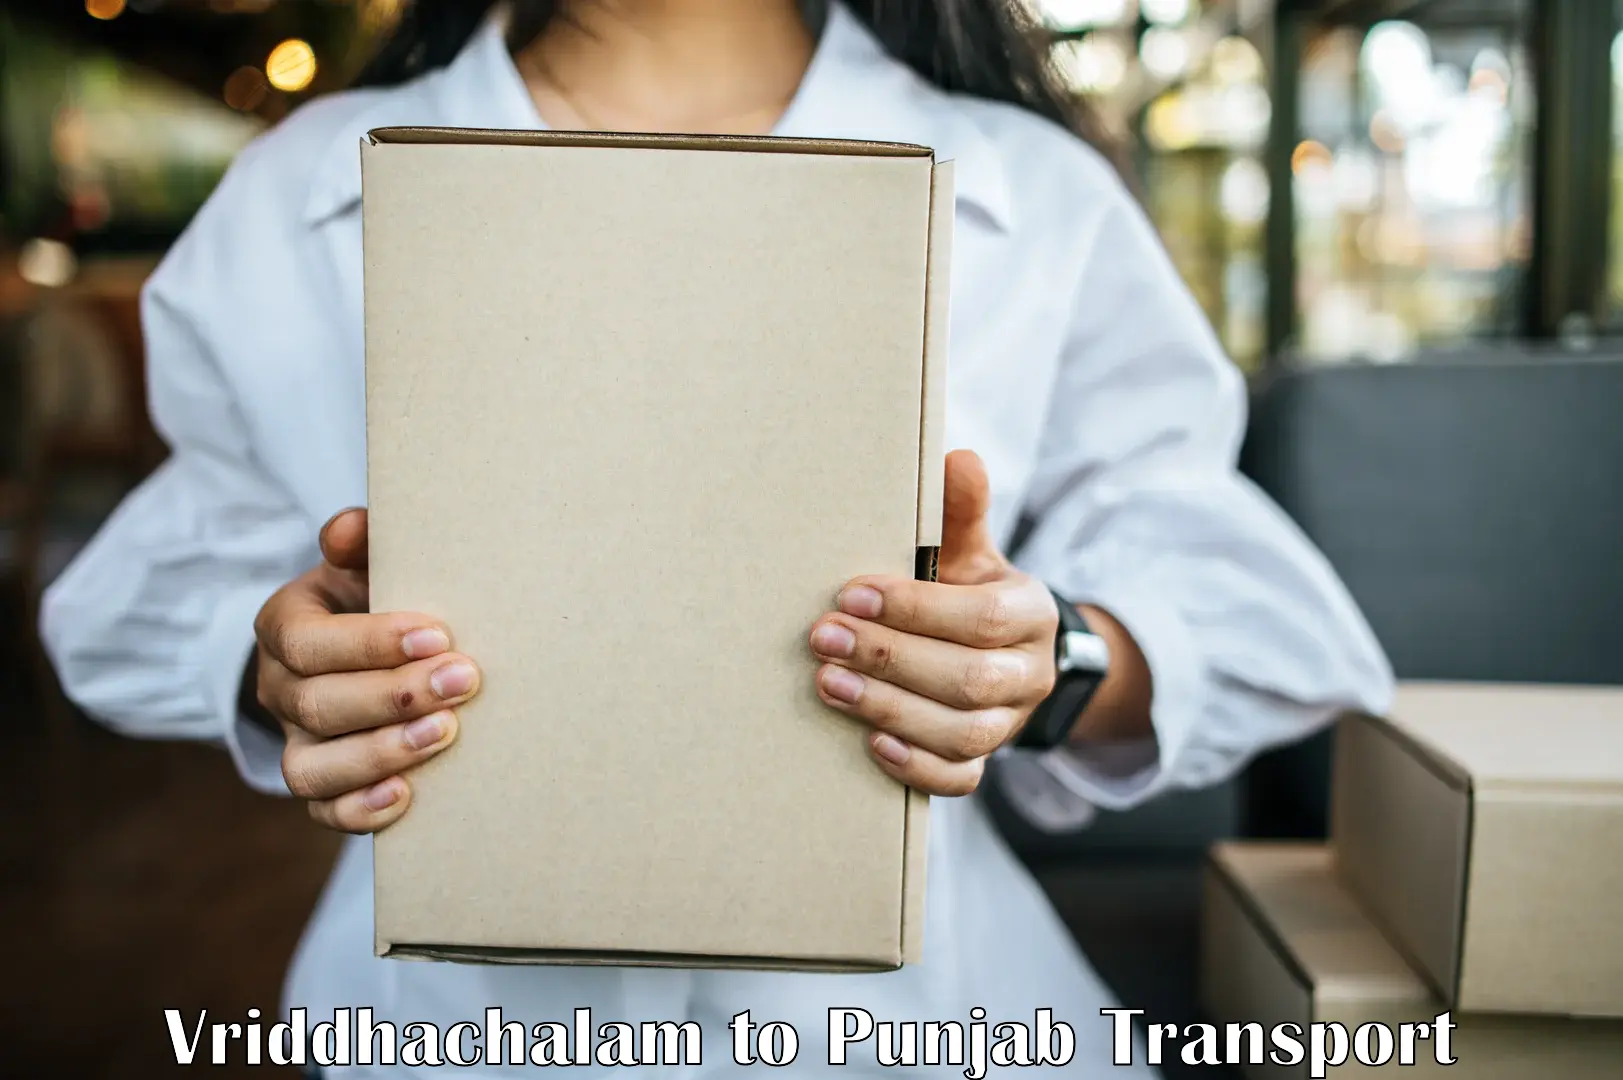 Transport shared services Vriddhachalam to Mohali